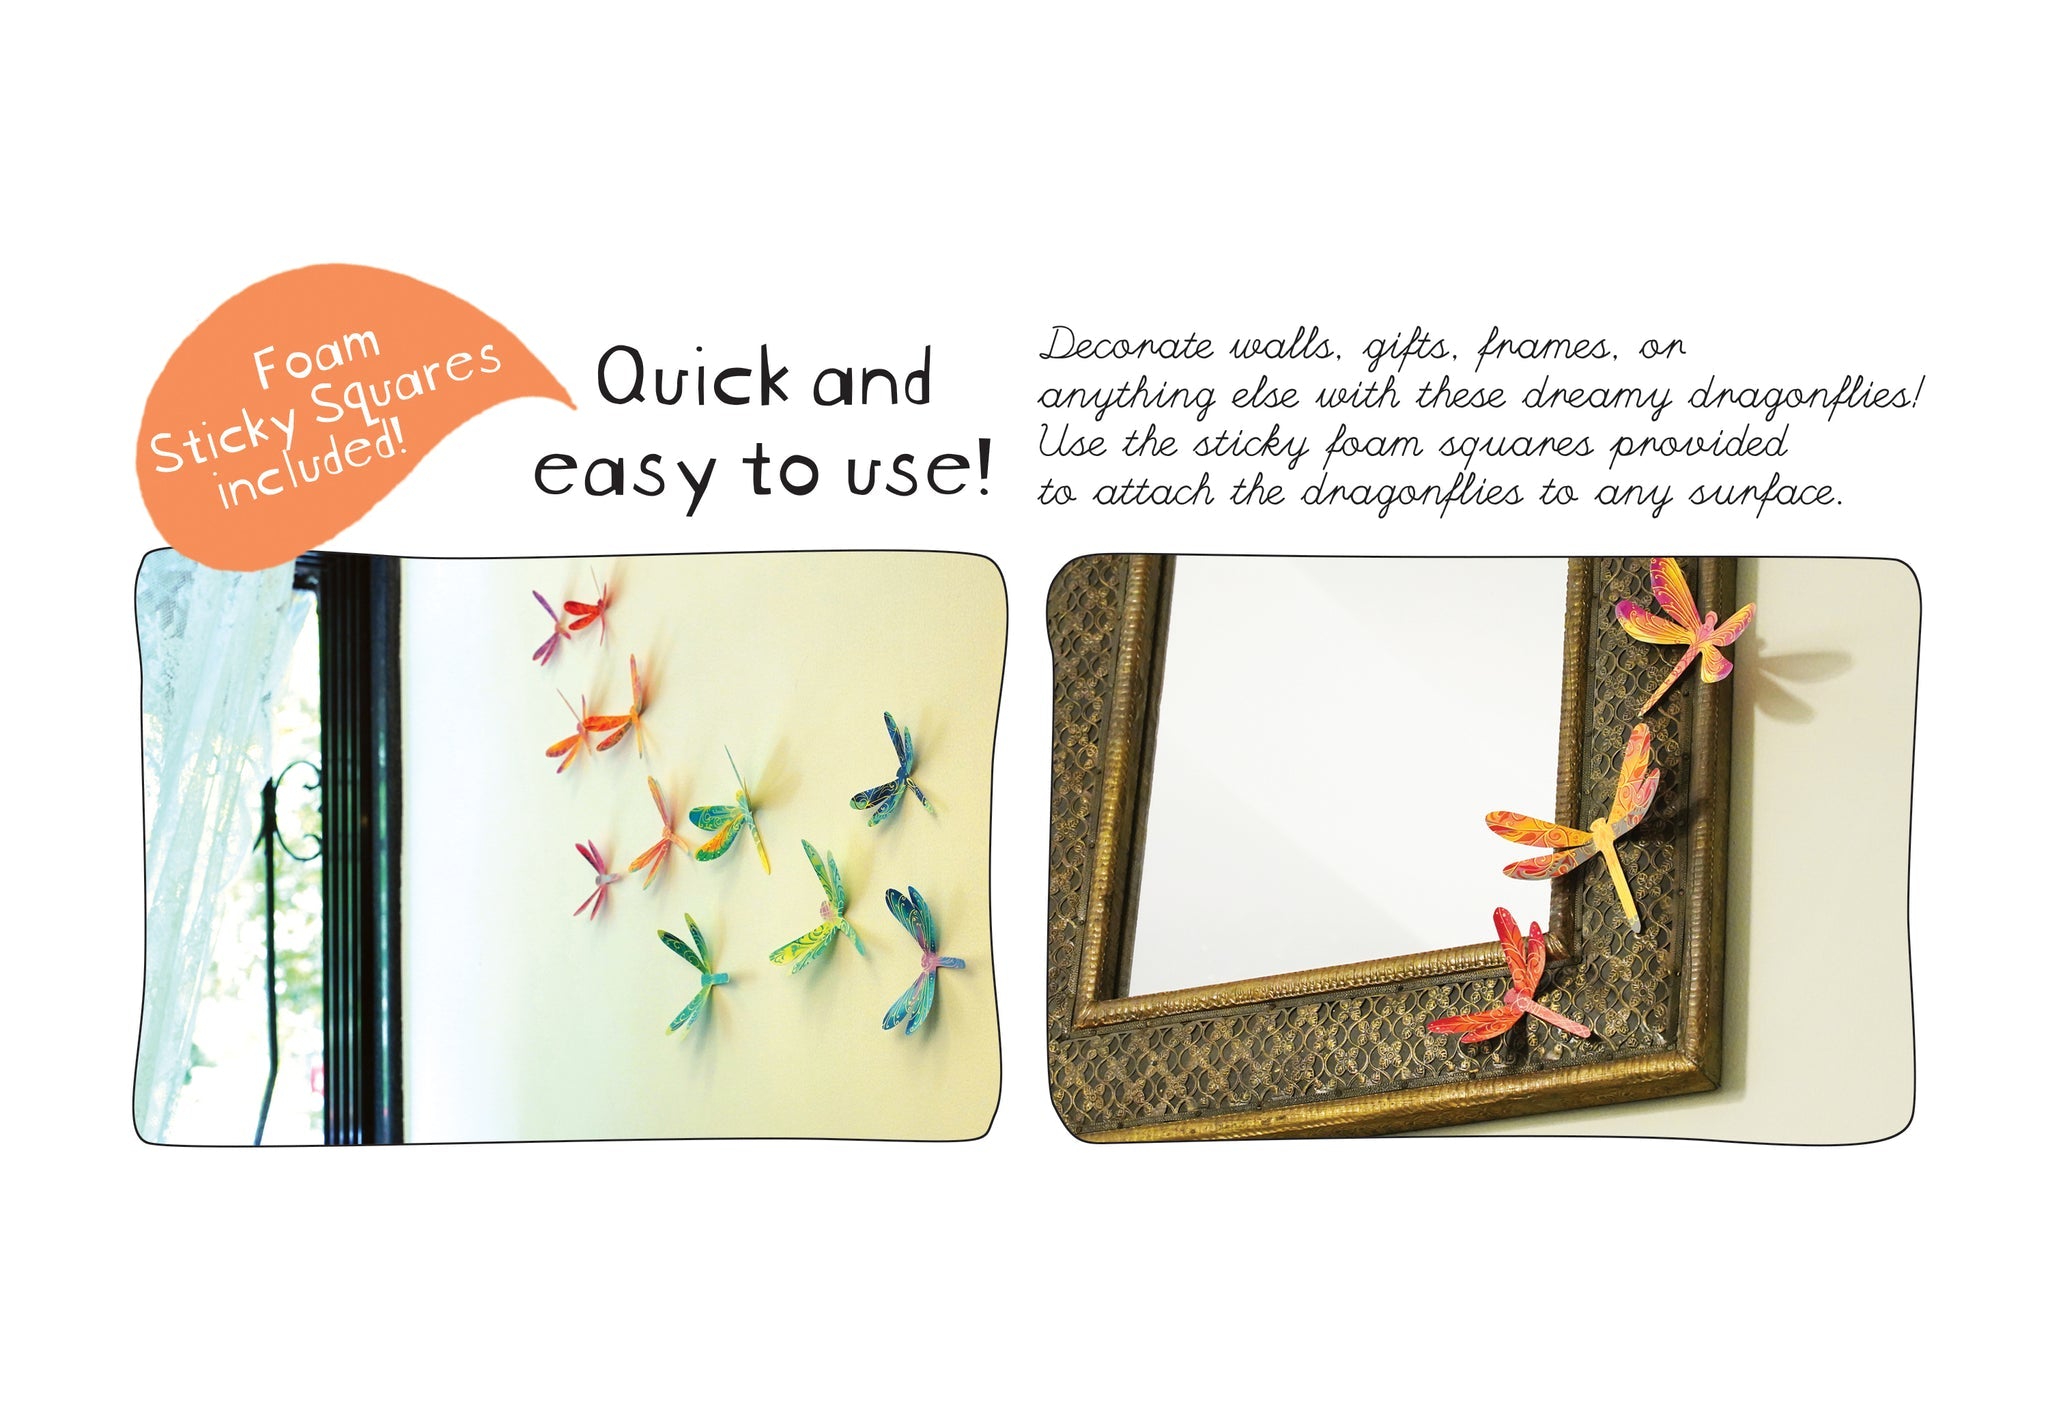 Paper Mini Happy Home Fairy Lights & Dragonflies Wall Decor Combo | Save 20%